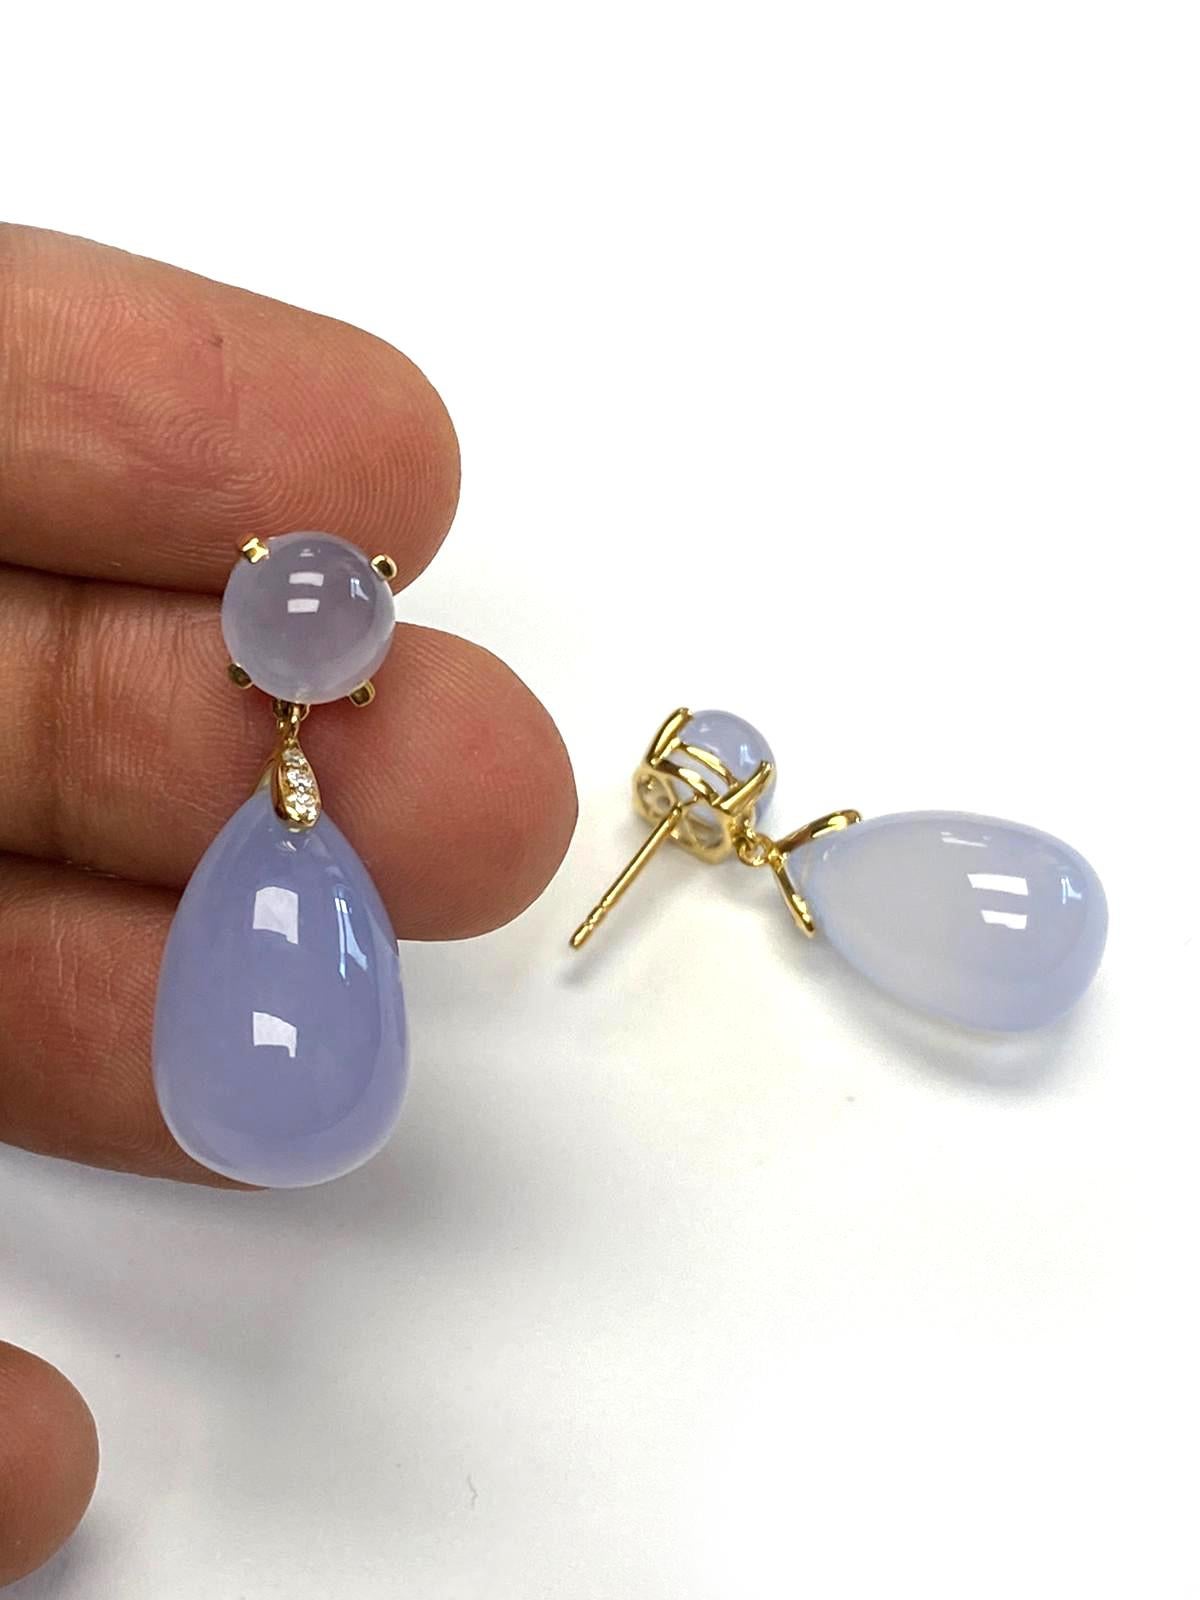 Drop & Cabochon Blue Chalcedony Earrings with Diamonds in 18K Yellow Gold, from 'Naughty' Collection.

Stone Size: 19 x 12 mm (Drop) & 8 mm (Cabochon)

Diamonds: G-H / VS; Approx. Wt: 0.06 Carats